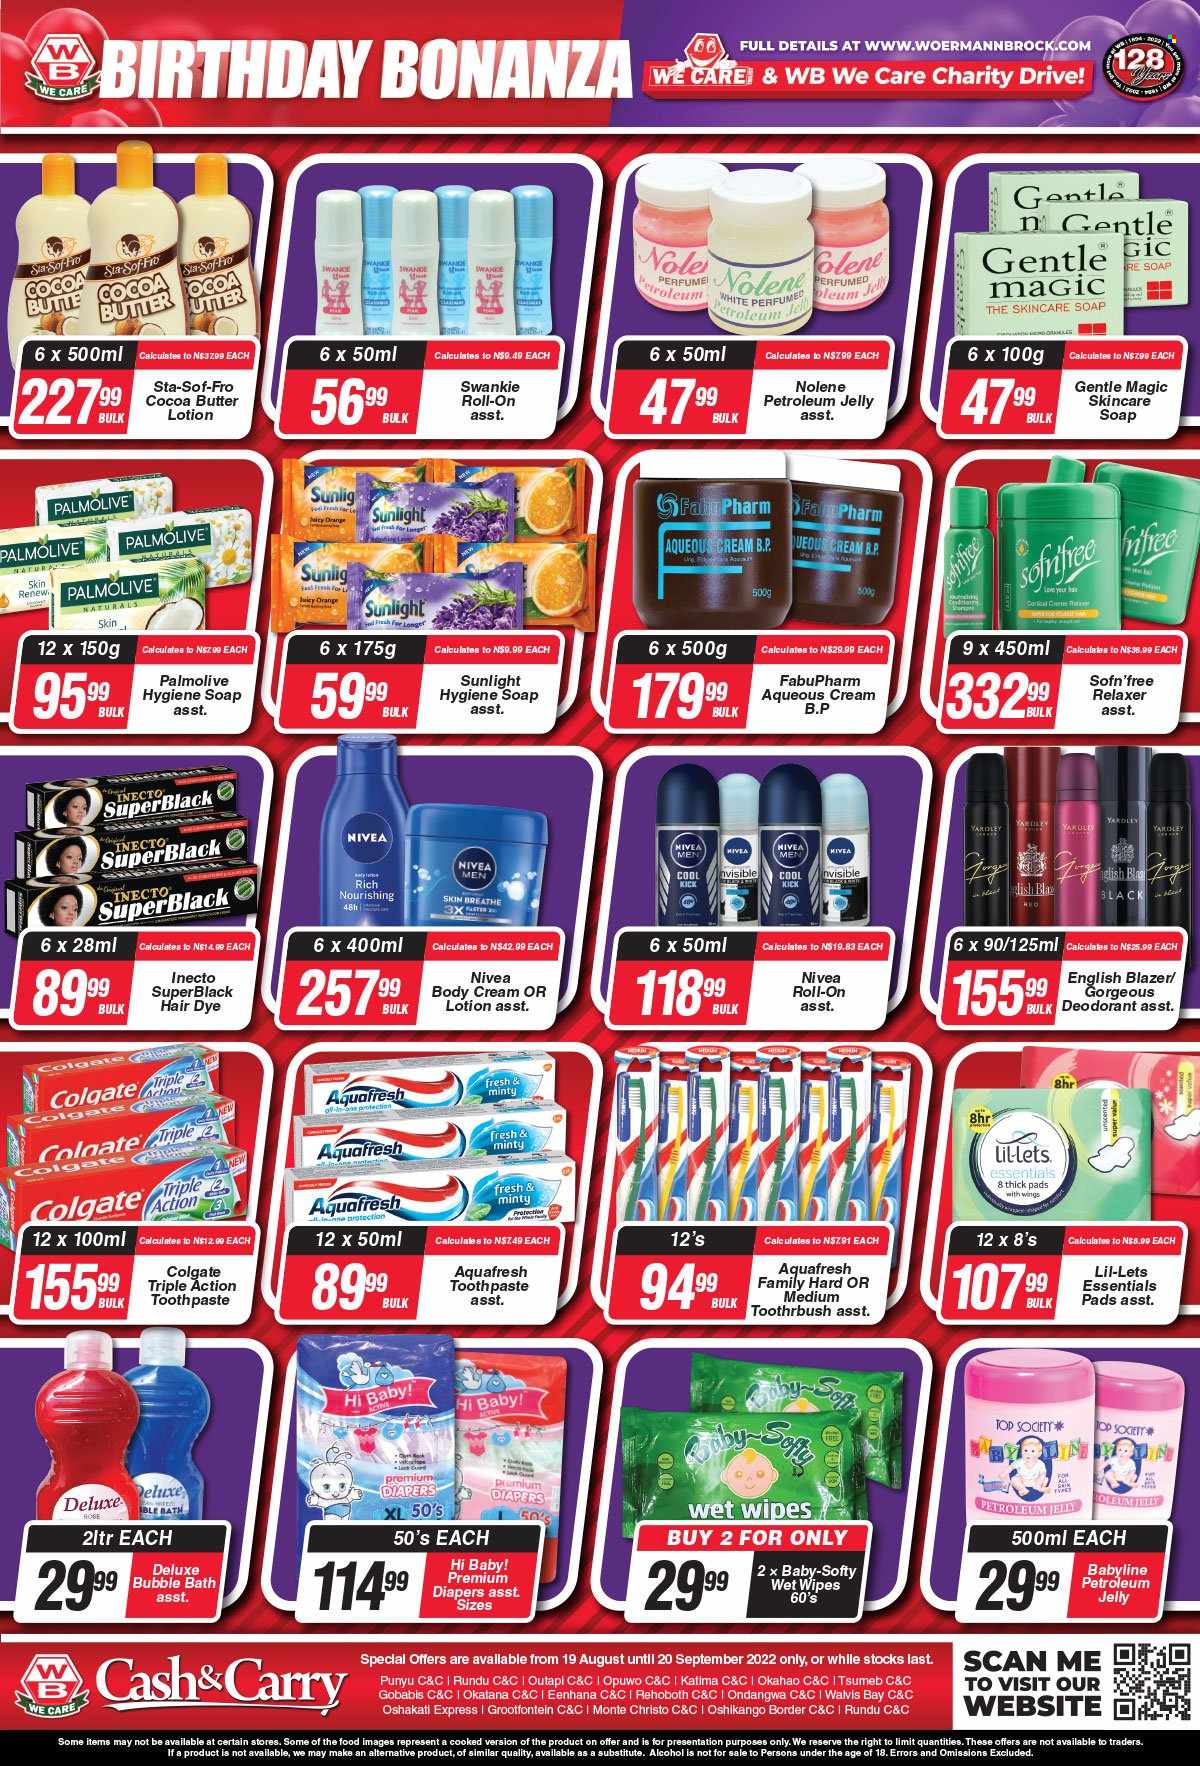 Woermann Brock catalogue  - 19/08/2022 - 20/09/2022 - Sales products - oranges, wine, alcohol, rosé wine, wipes, nappies, Sunlight, bubble bath, Nivea, Palmolive, soap, Colgate, toothpaste, Lil-lets, petroleum jelly, Gentle Magic, relaxer, body lotion, Top Society, anti-perspirant, eau de parfum, roll-on, English Blazer, Yardley, deodorant, Swankie. Page 5.